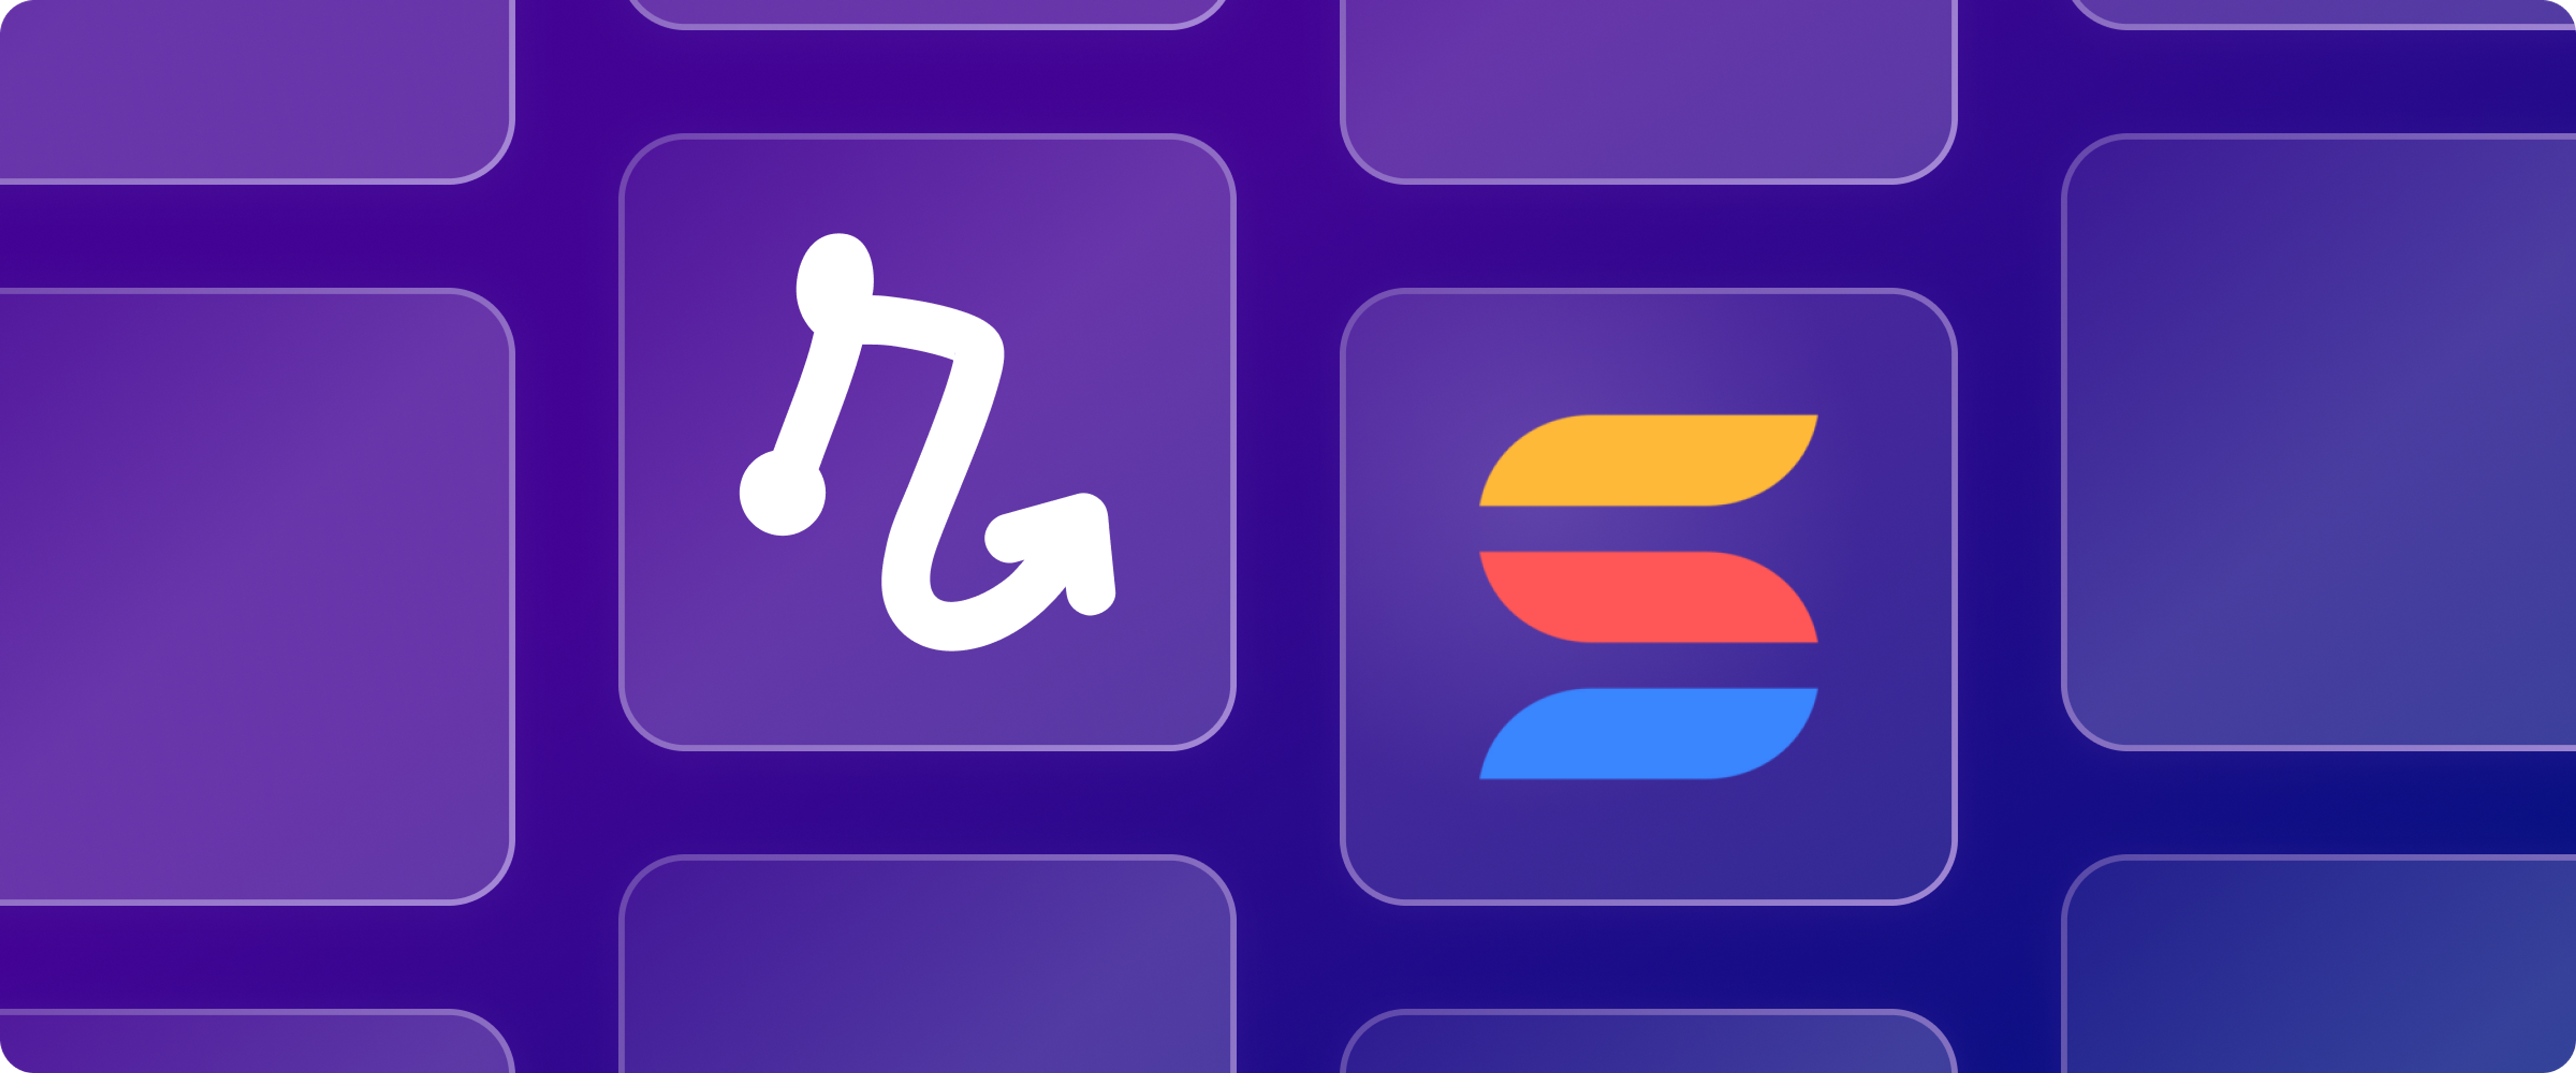 Relay and SmartSuite logos